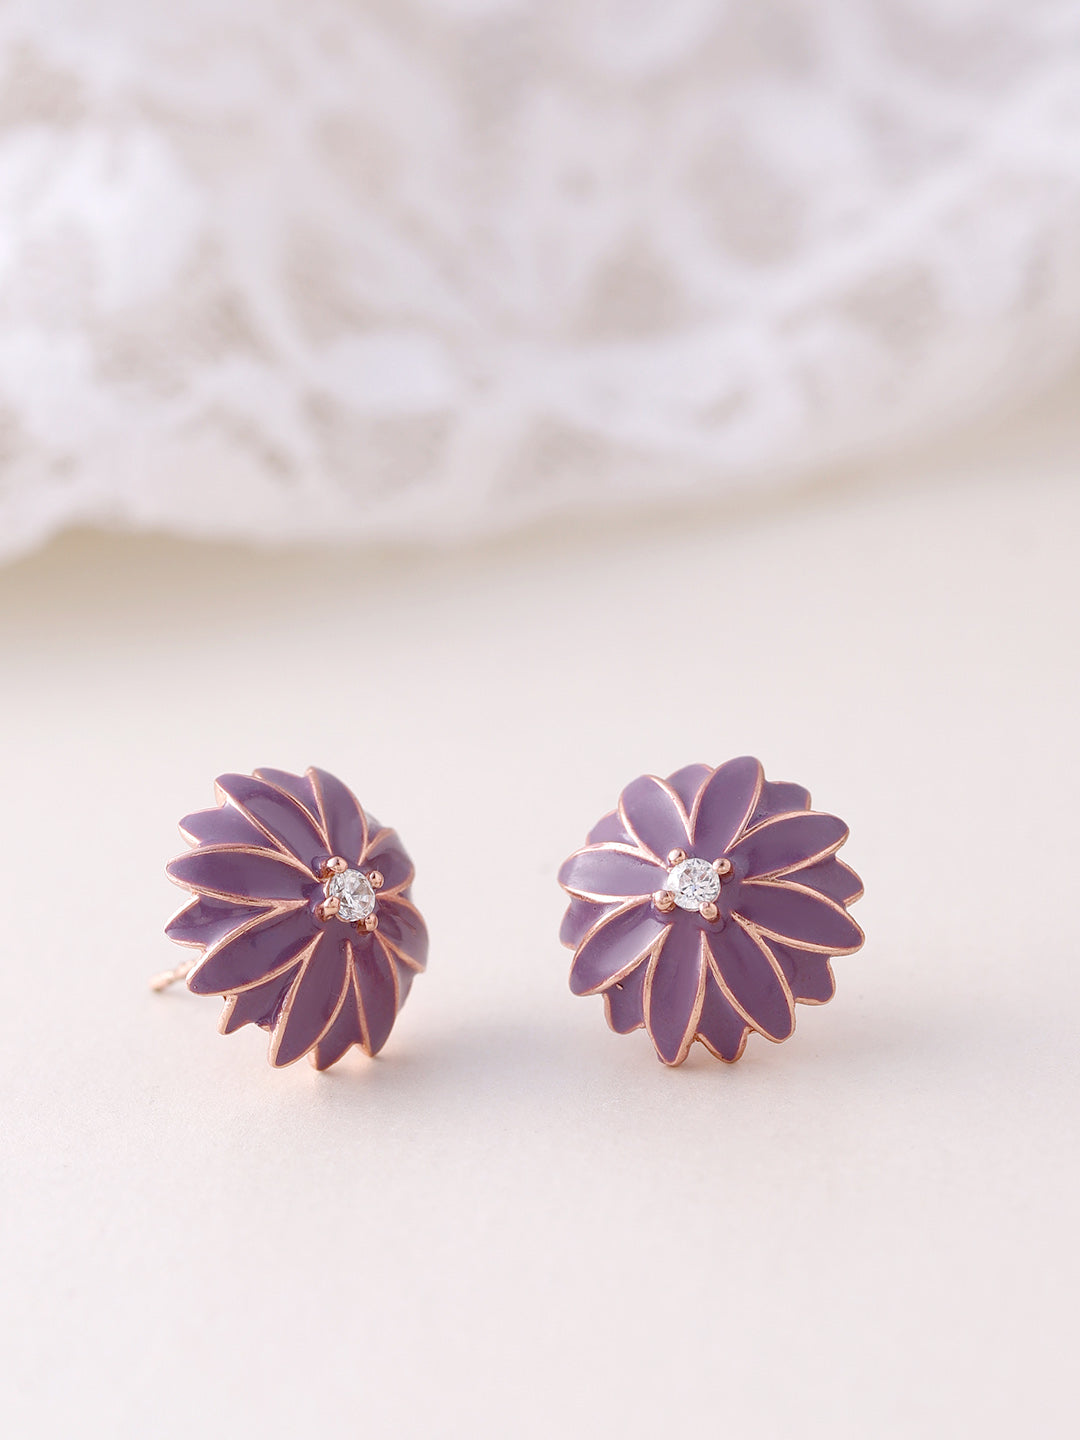 Buy OSF Floral Shape Purple colour alloy Fashion Earrings For Girls And  Womens. at Amazon.in